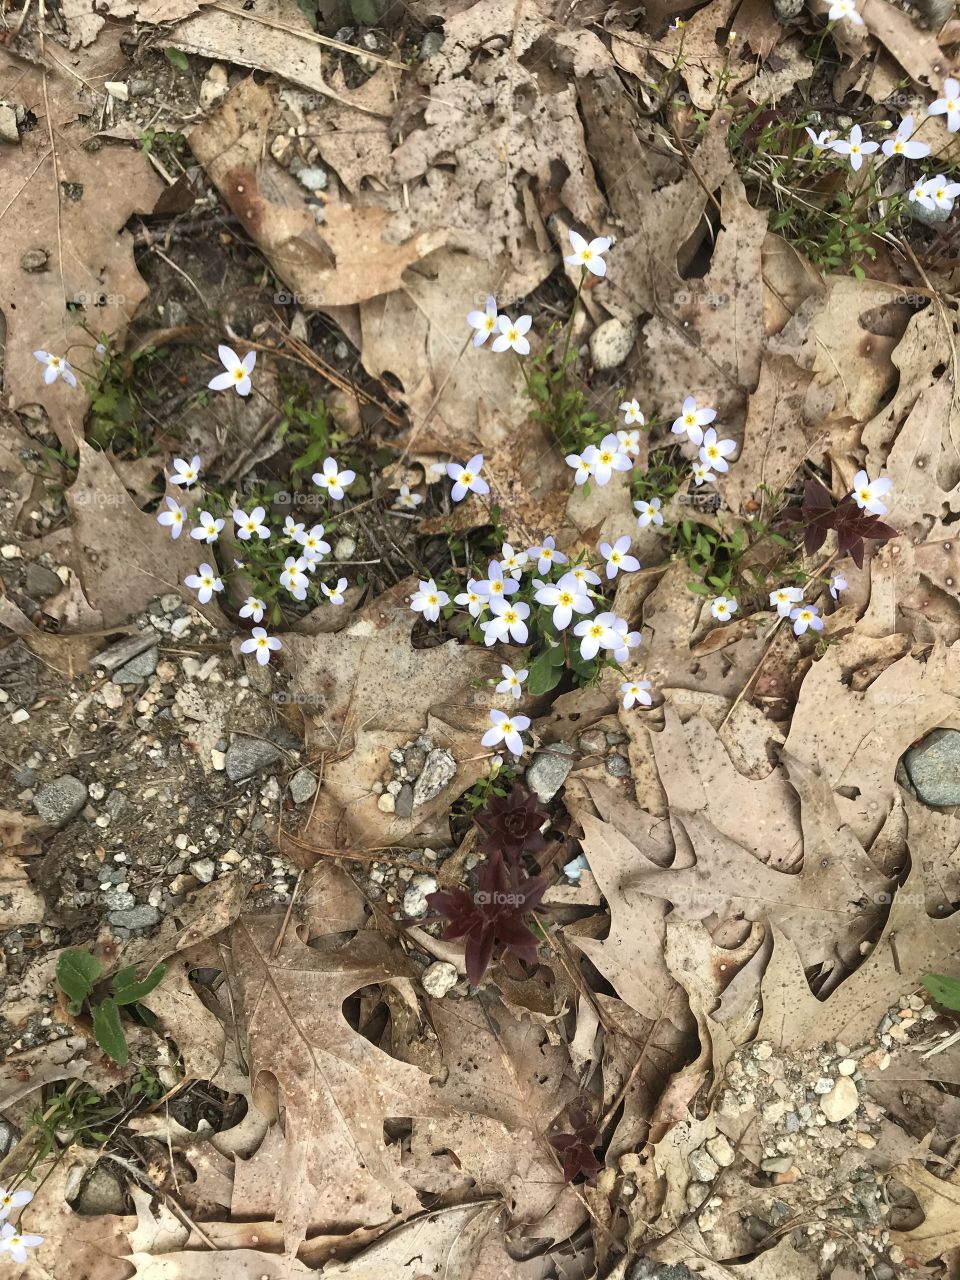 Flowers on the Ground. New life in the Spring.